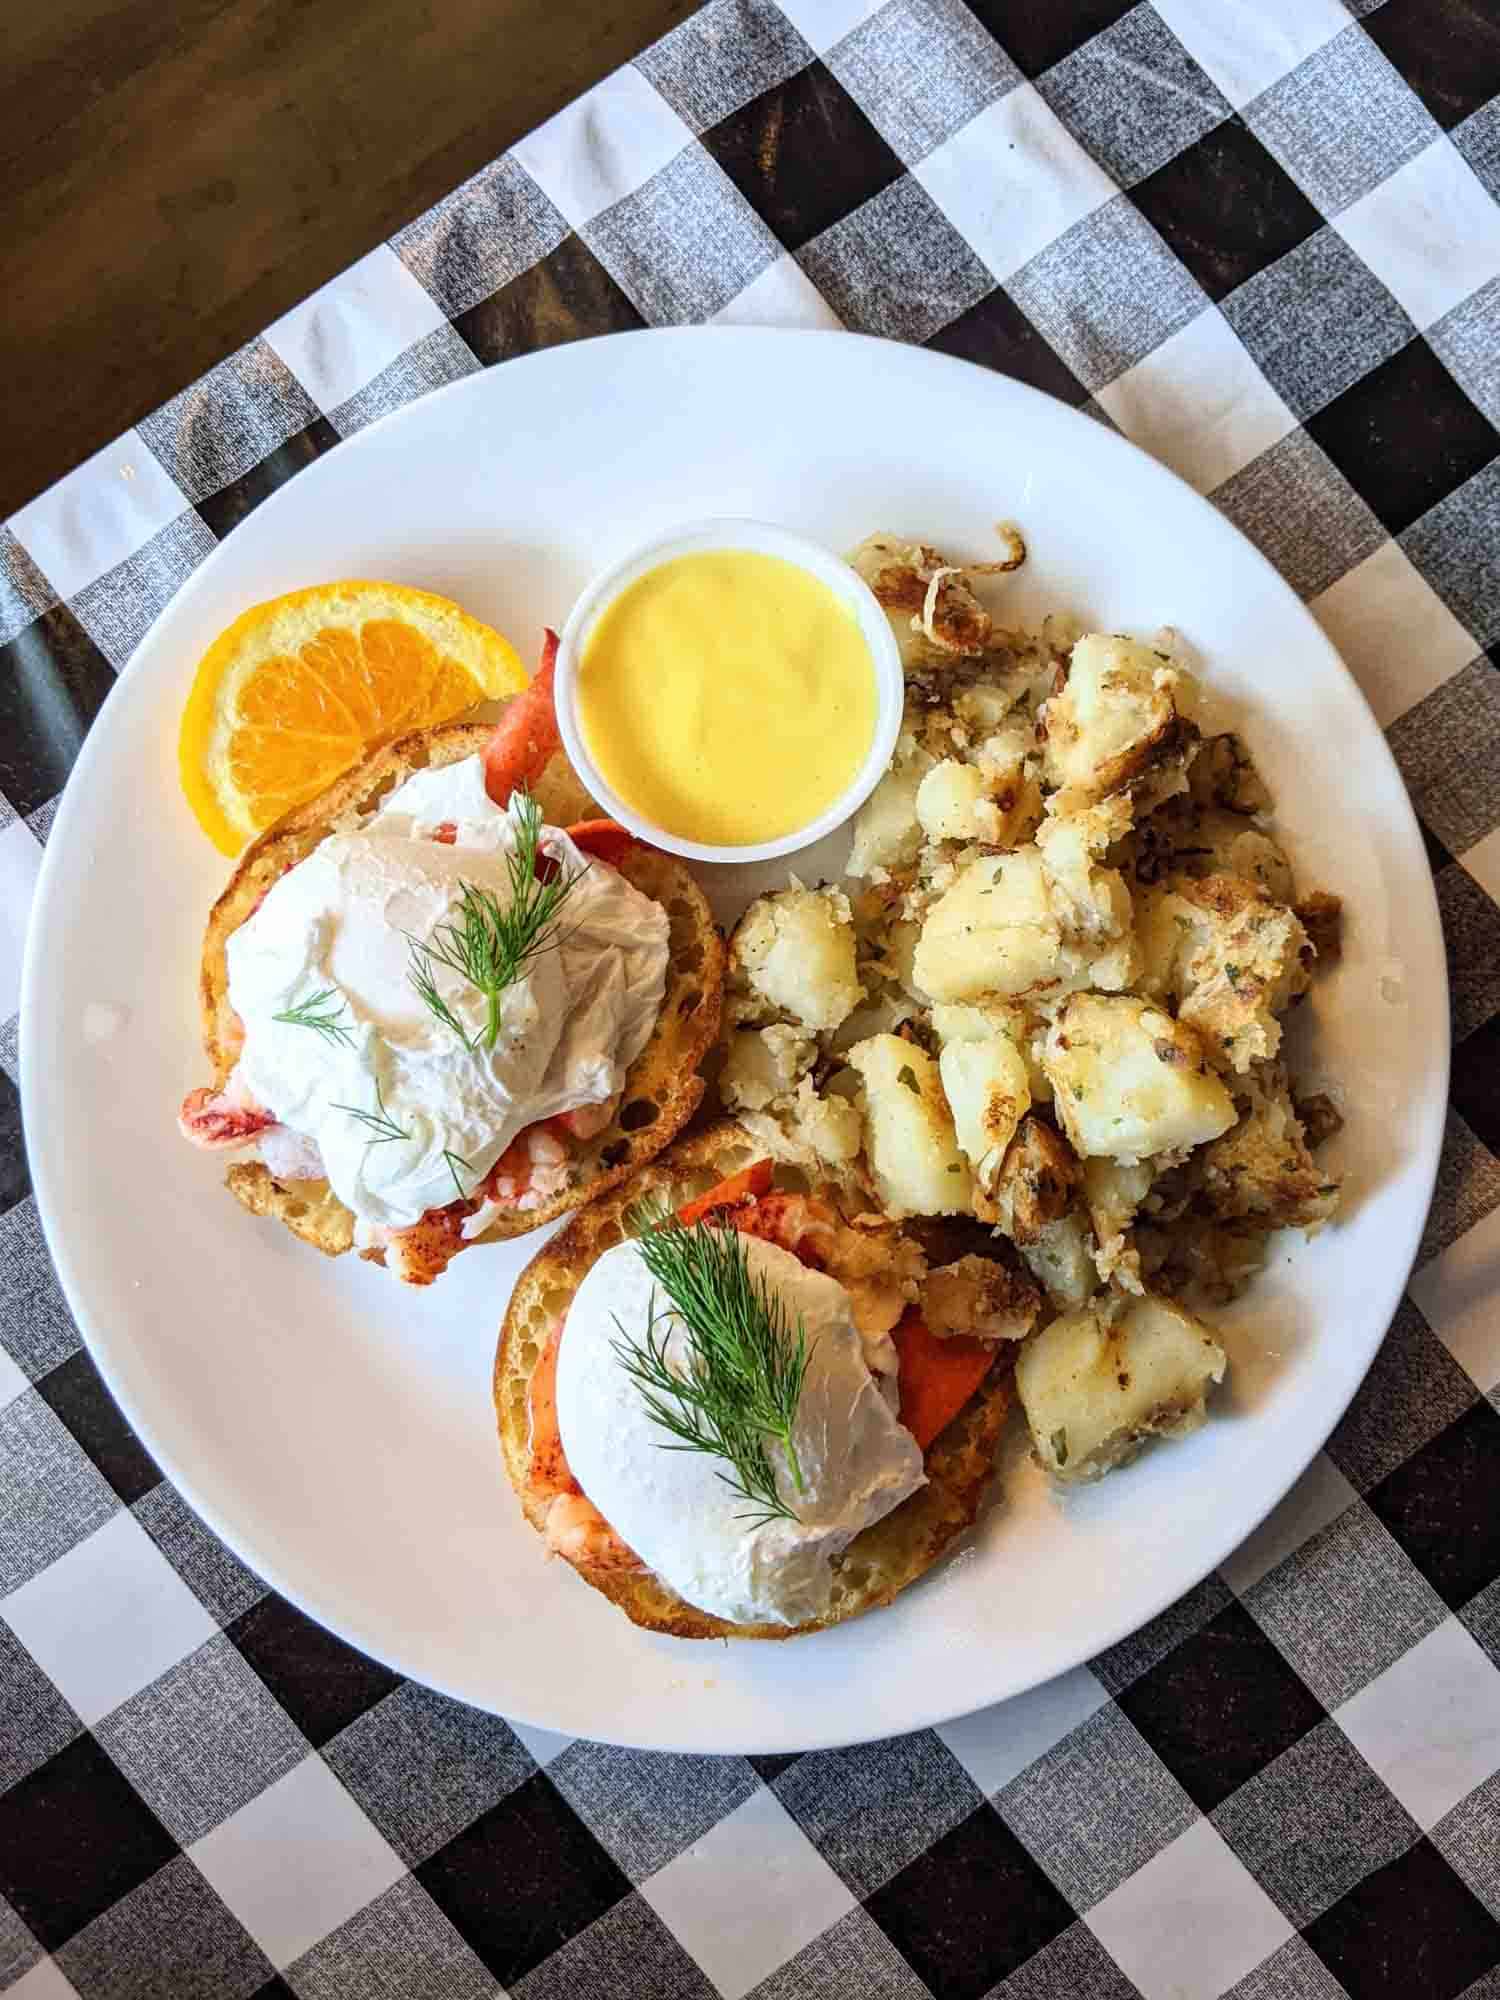 lobster eggs benedict from Claudine's Eatery restaurant in Fredericton